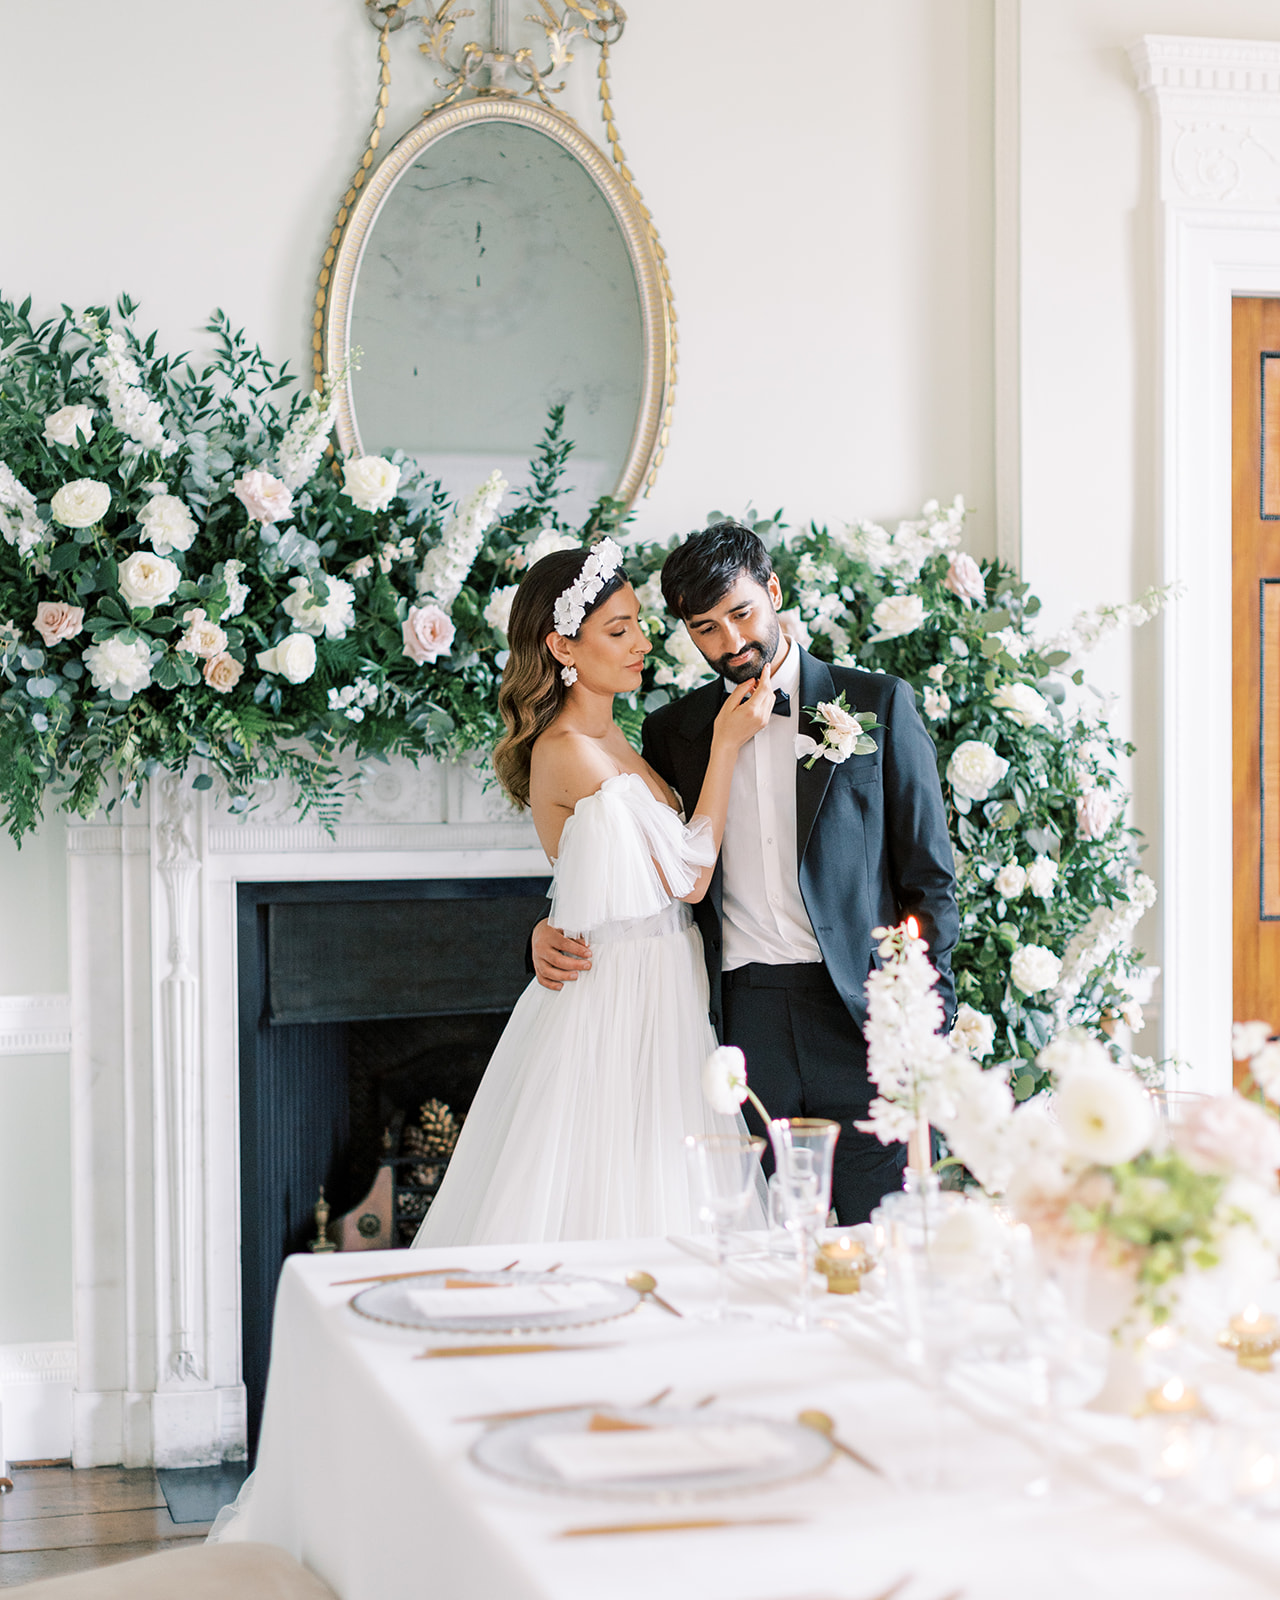 Kelmarsh Hall wedding florist Flourish and Grace with Sophie May Photography, fireplace arrangement with bride and groom